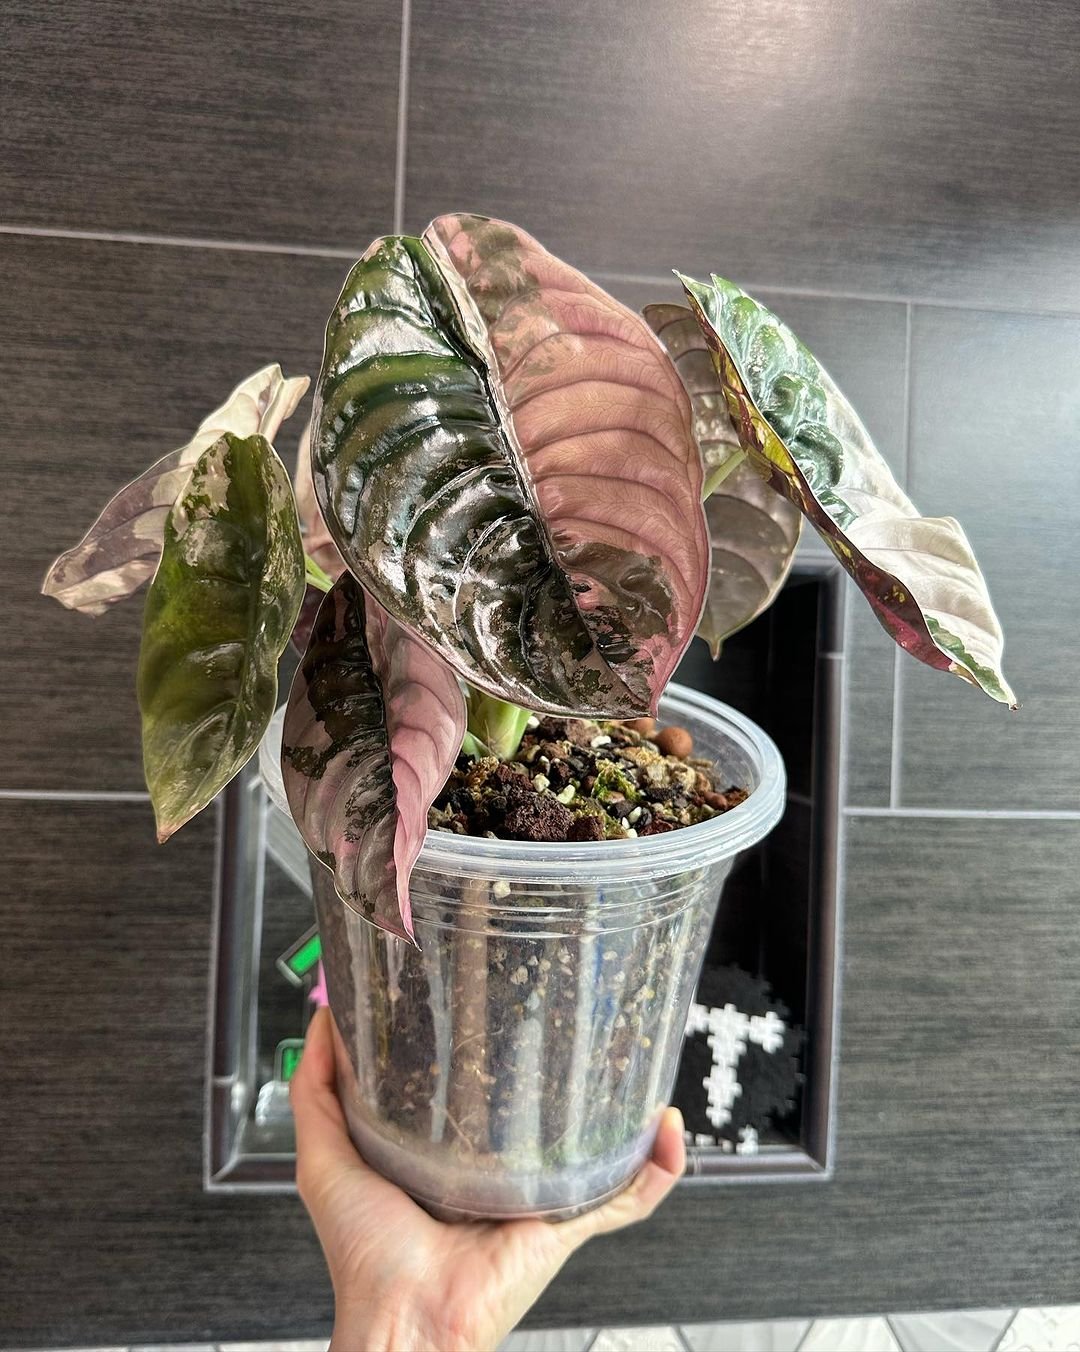 Alocasia Cuprea: A stunning plant with metallic, iridescent leaves in shades of copper and bronze.

